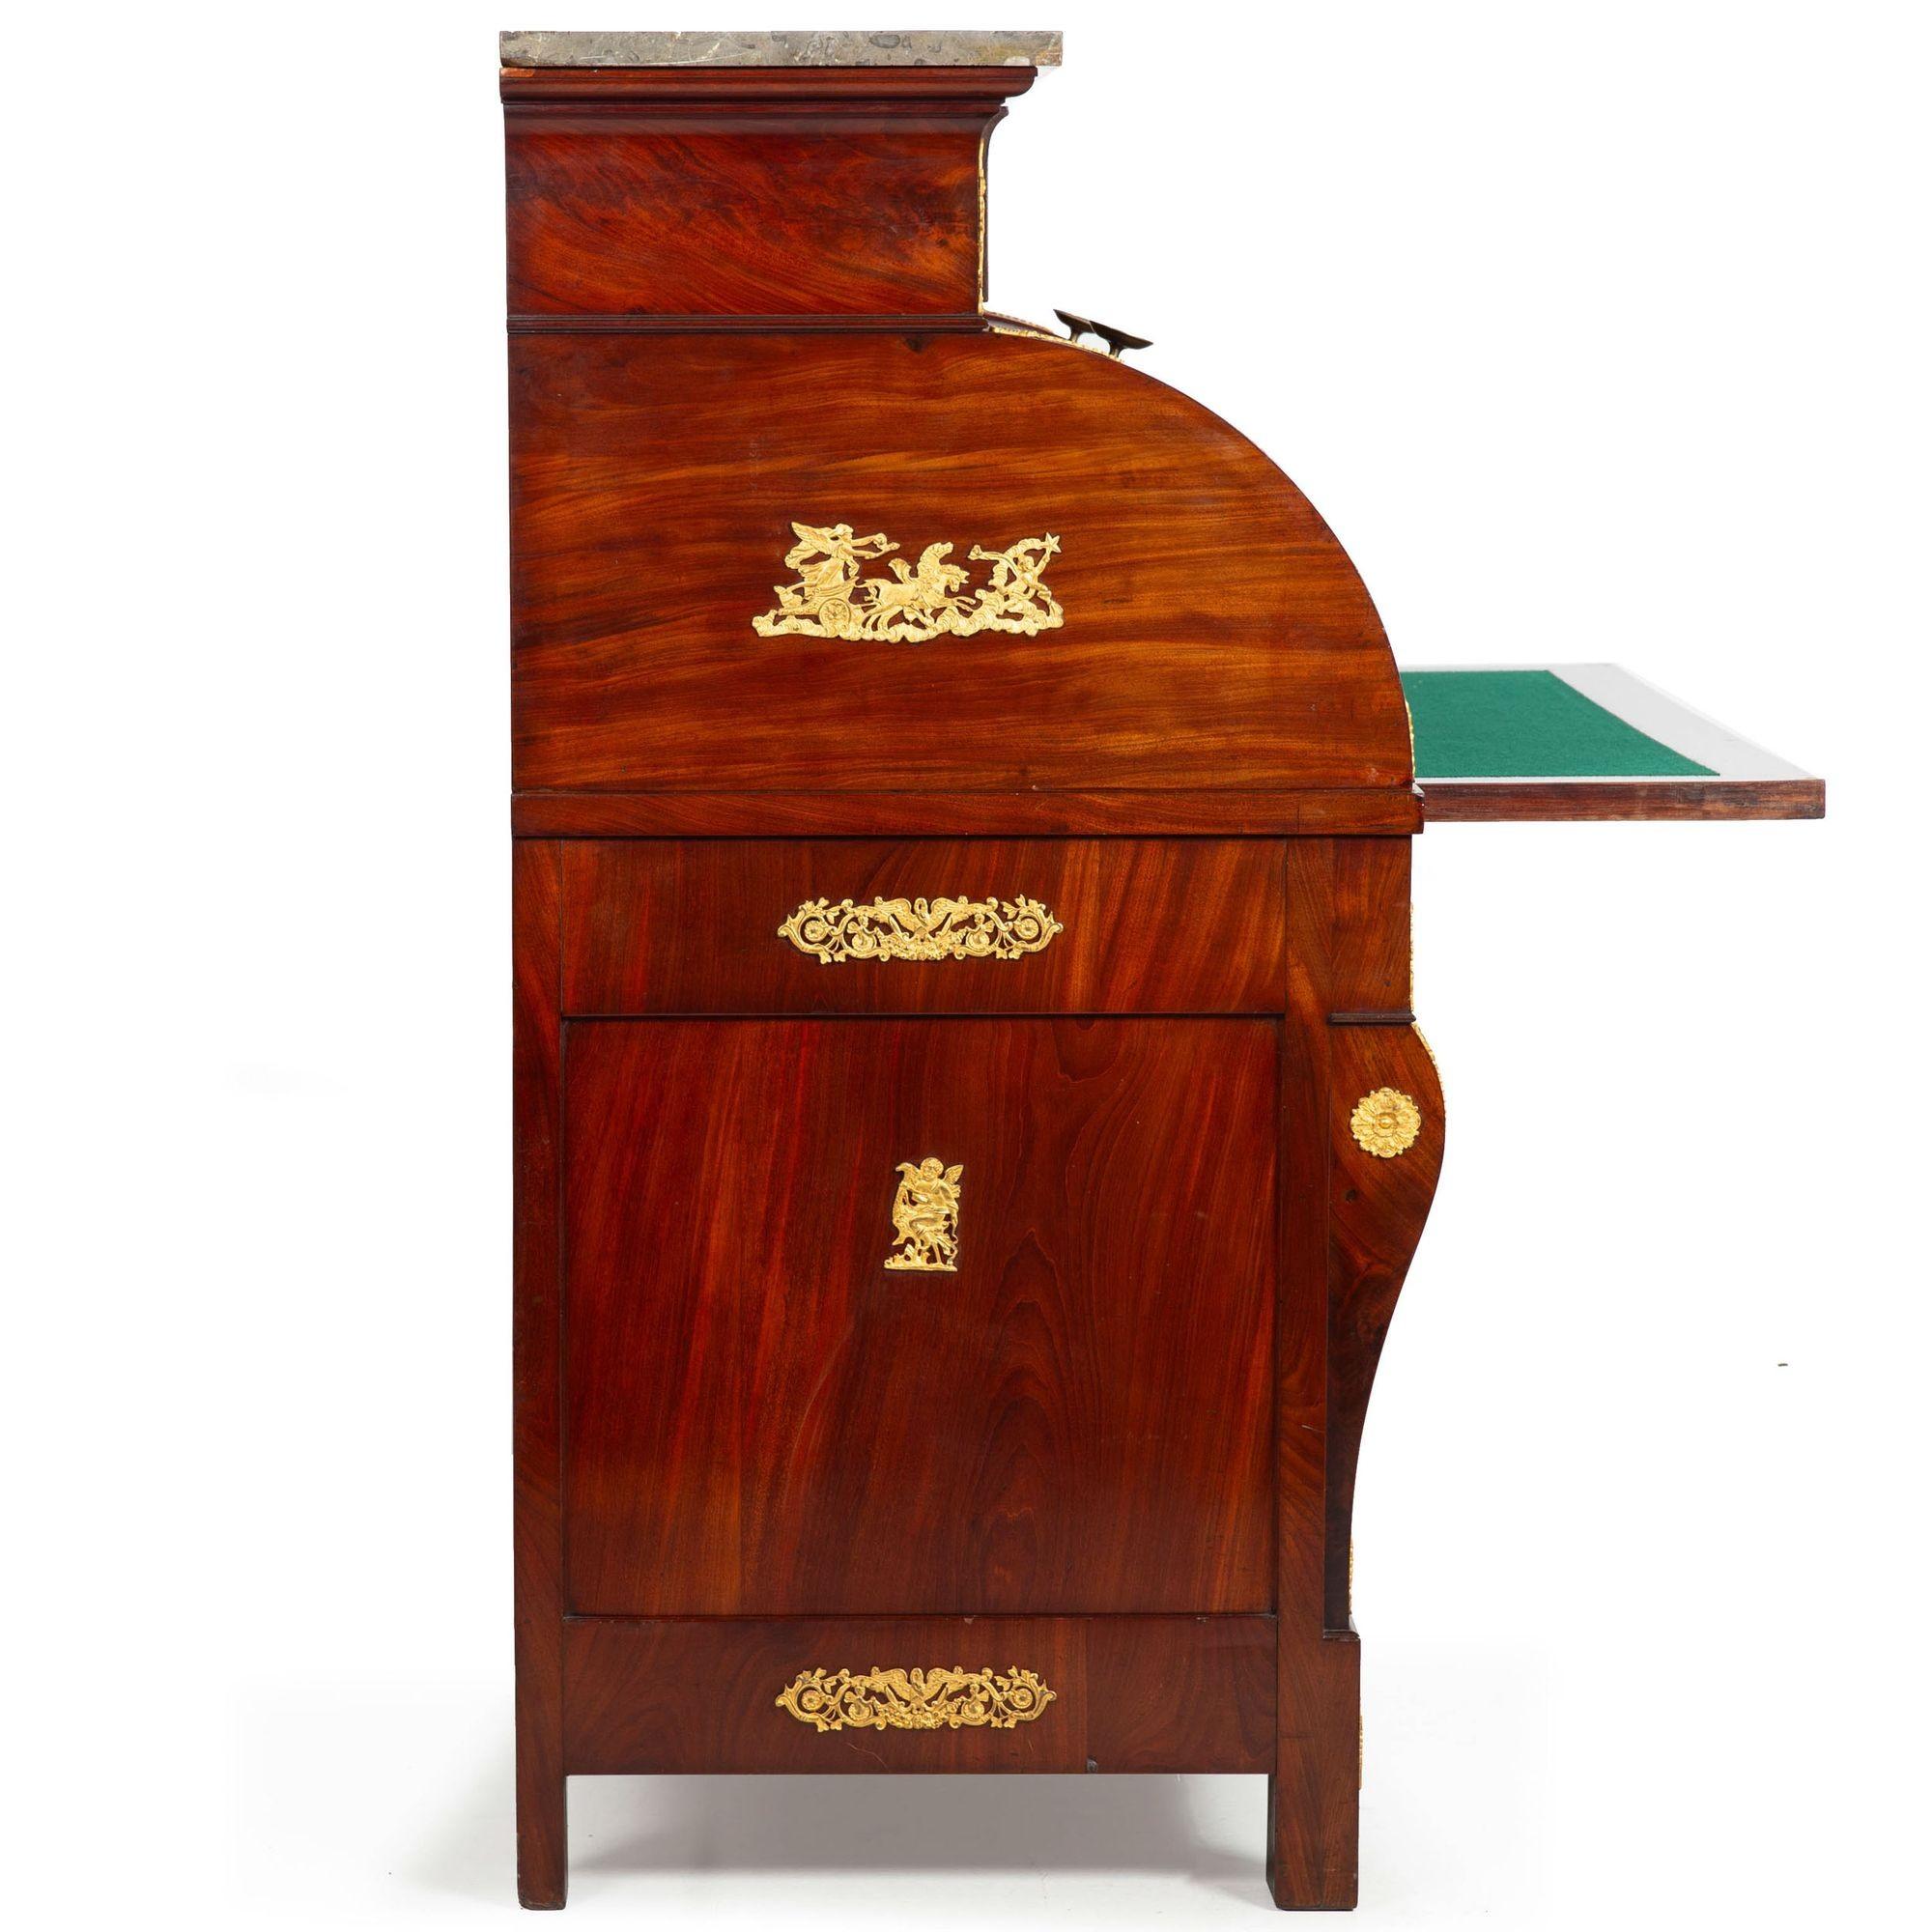 19th Century French Restauration Antique Mahogany Cylinder Roll-Top Desk circa 1830 For Sale